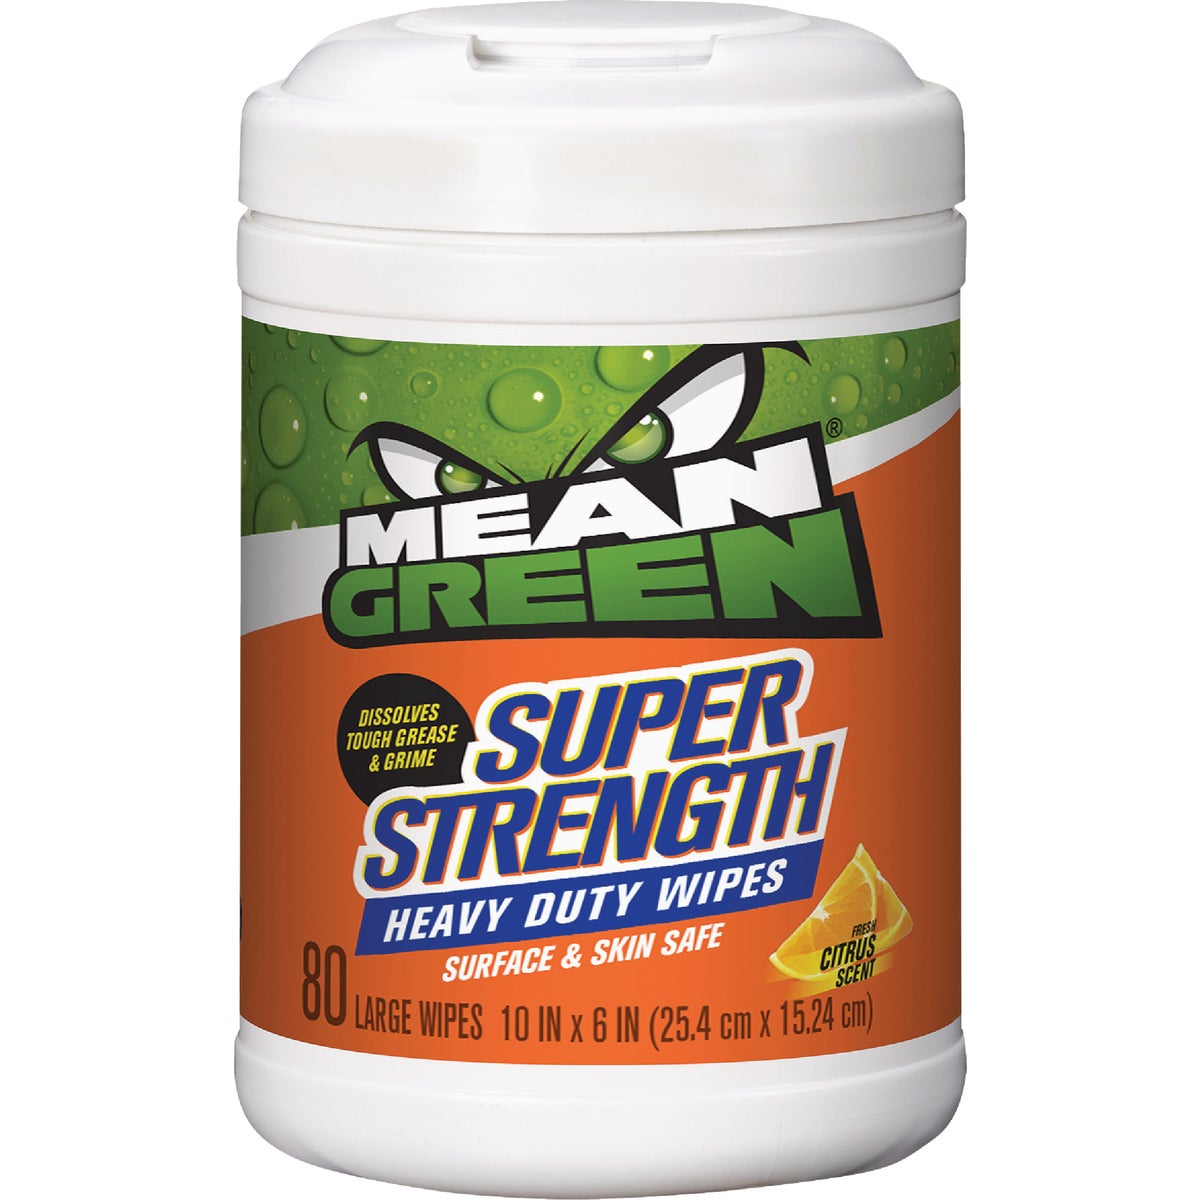 Mean Green Super Strength Fresh Citrus Heavy Duty Cleaner Degreaser Wipes (80-Count)